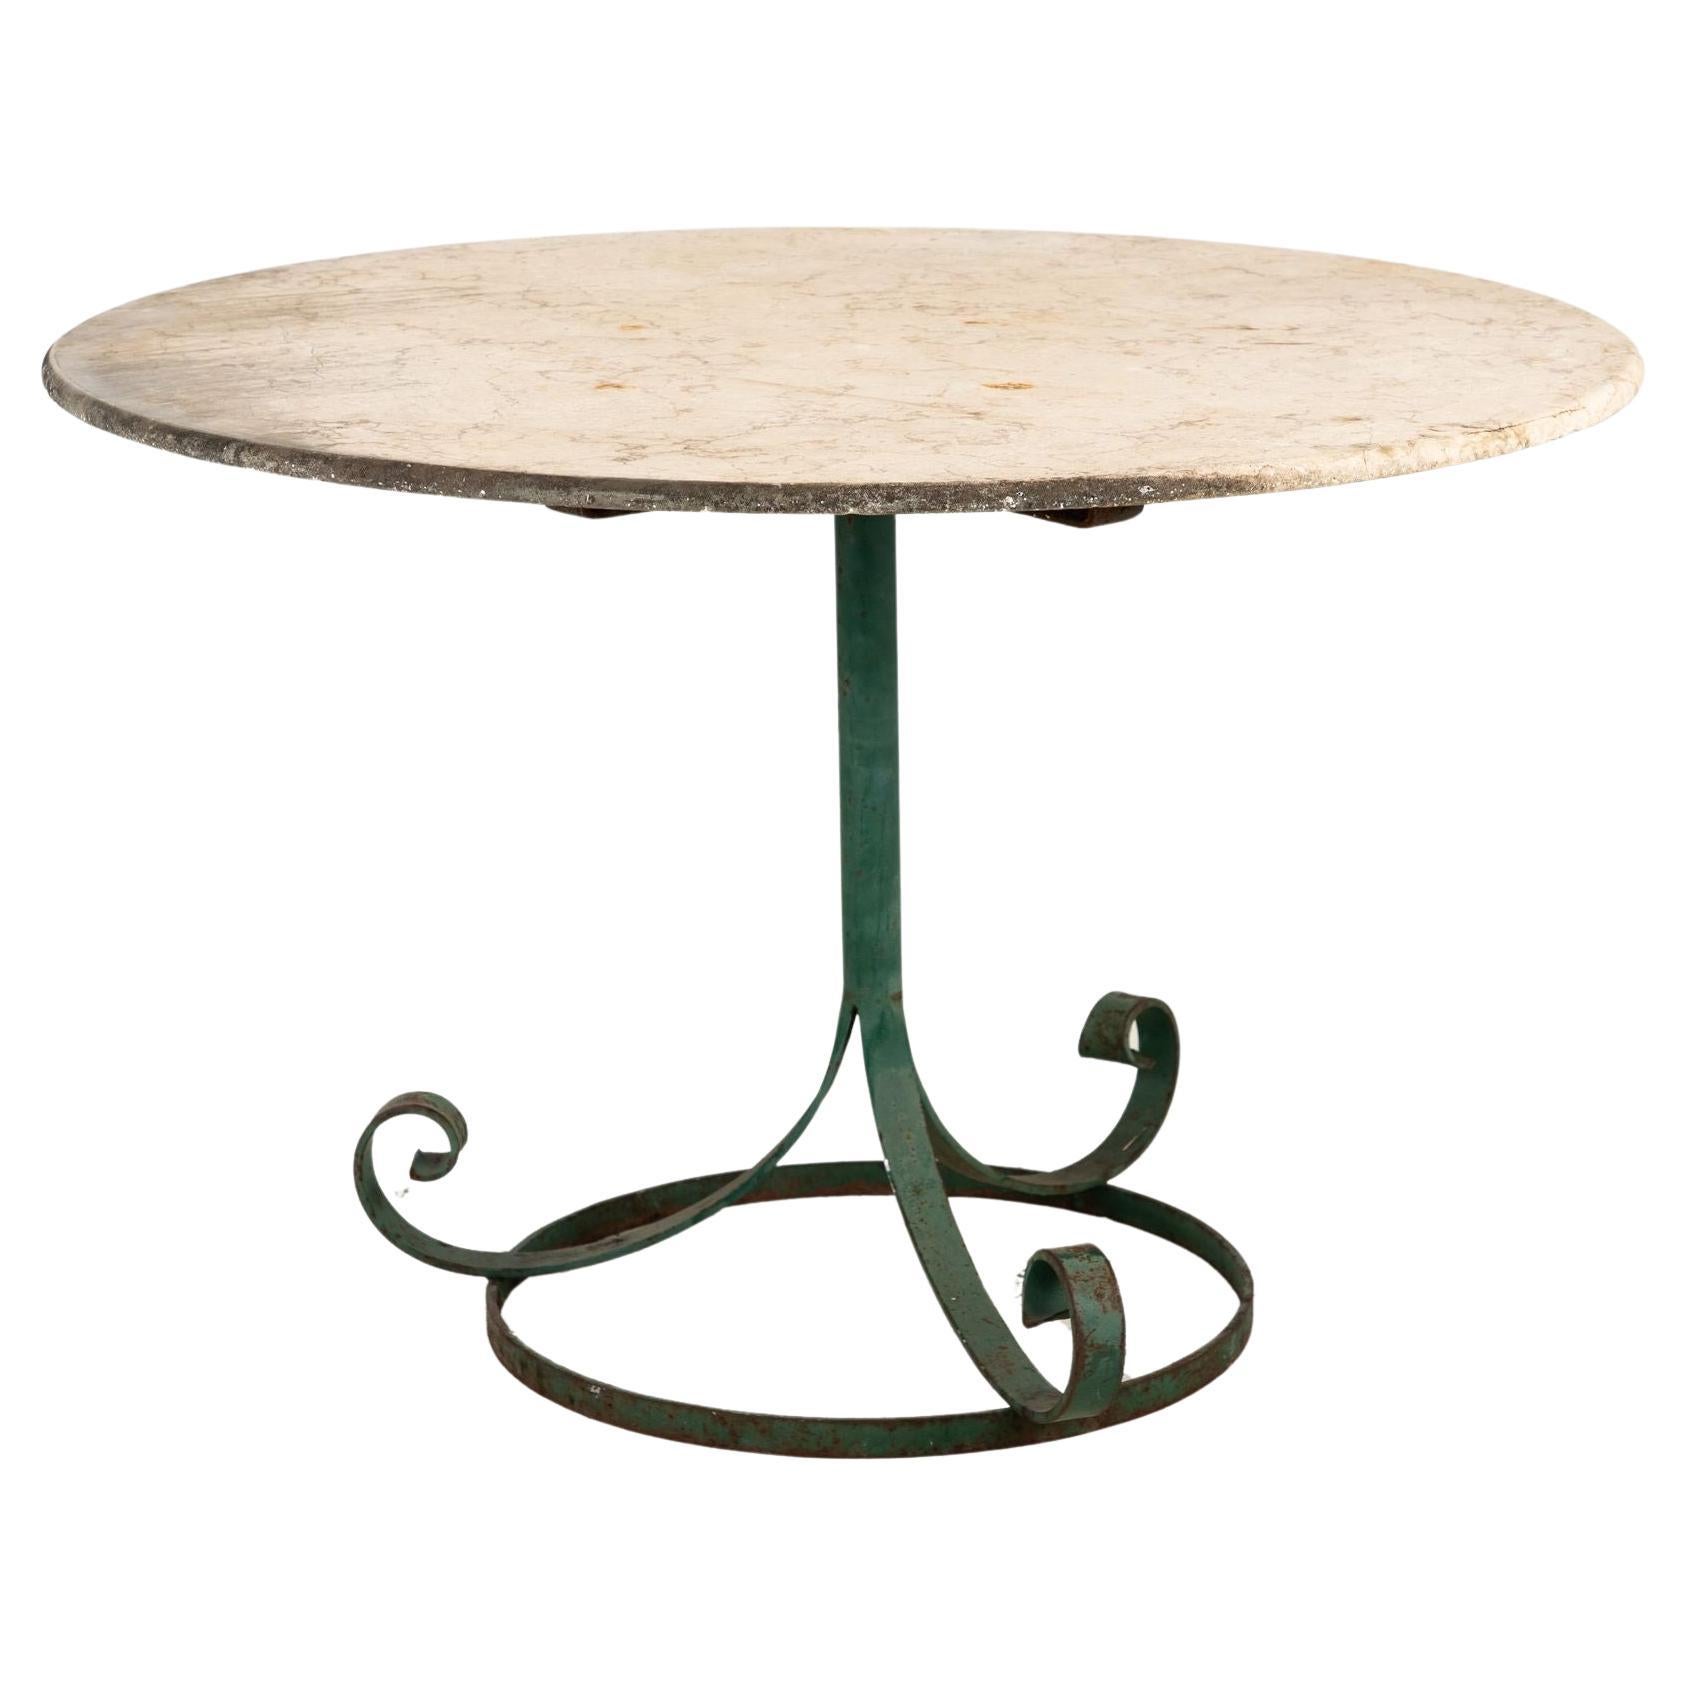 Marble Topped Garden or Pub Table with Green Iron Base, French 20th c. For Sale